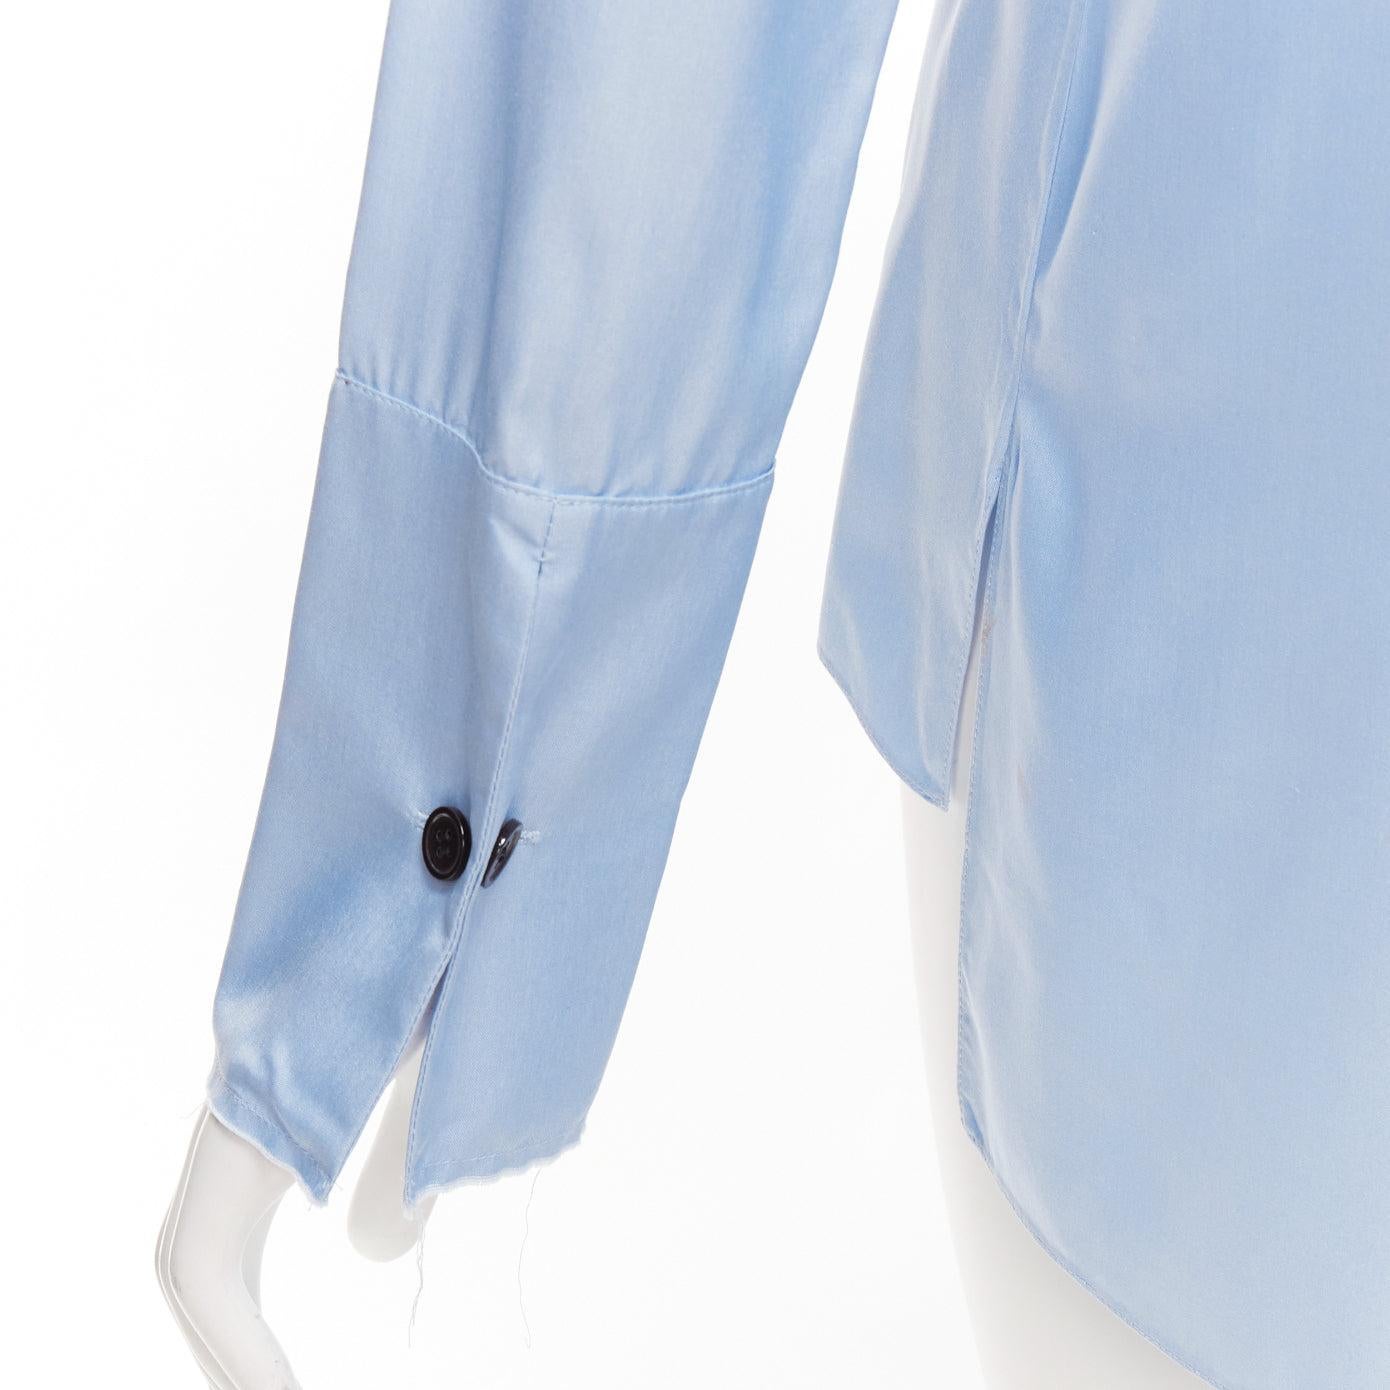 MARNI pastel blue 100% silk raw edge collar pocketed high low hem shirt IT38 XS
Reference: NKLL/A00186
Brand: Marni
Material: Silk
Color: Blue
Pattern: Solid
Closure: Button
Extra Details: High low hem.
Made in: Italy

CONDITION:
Condition: Good,